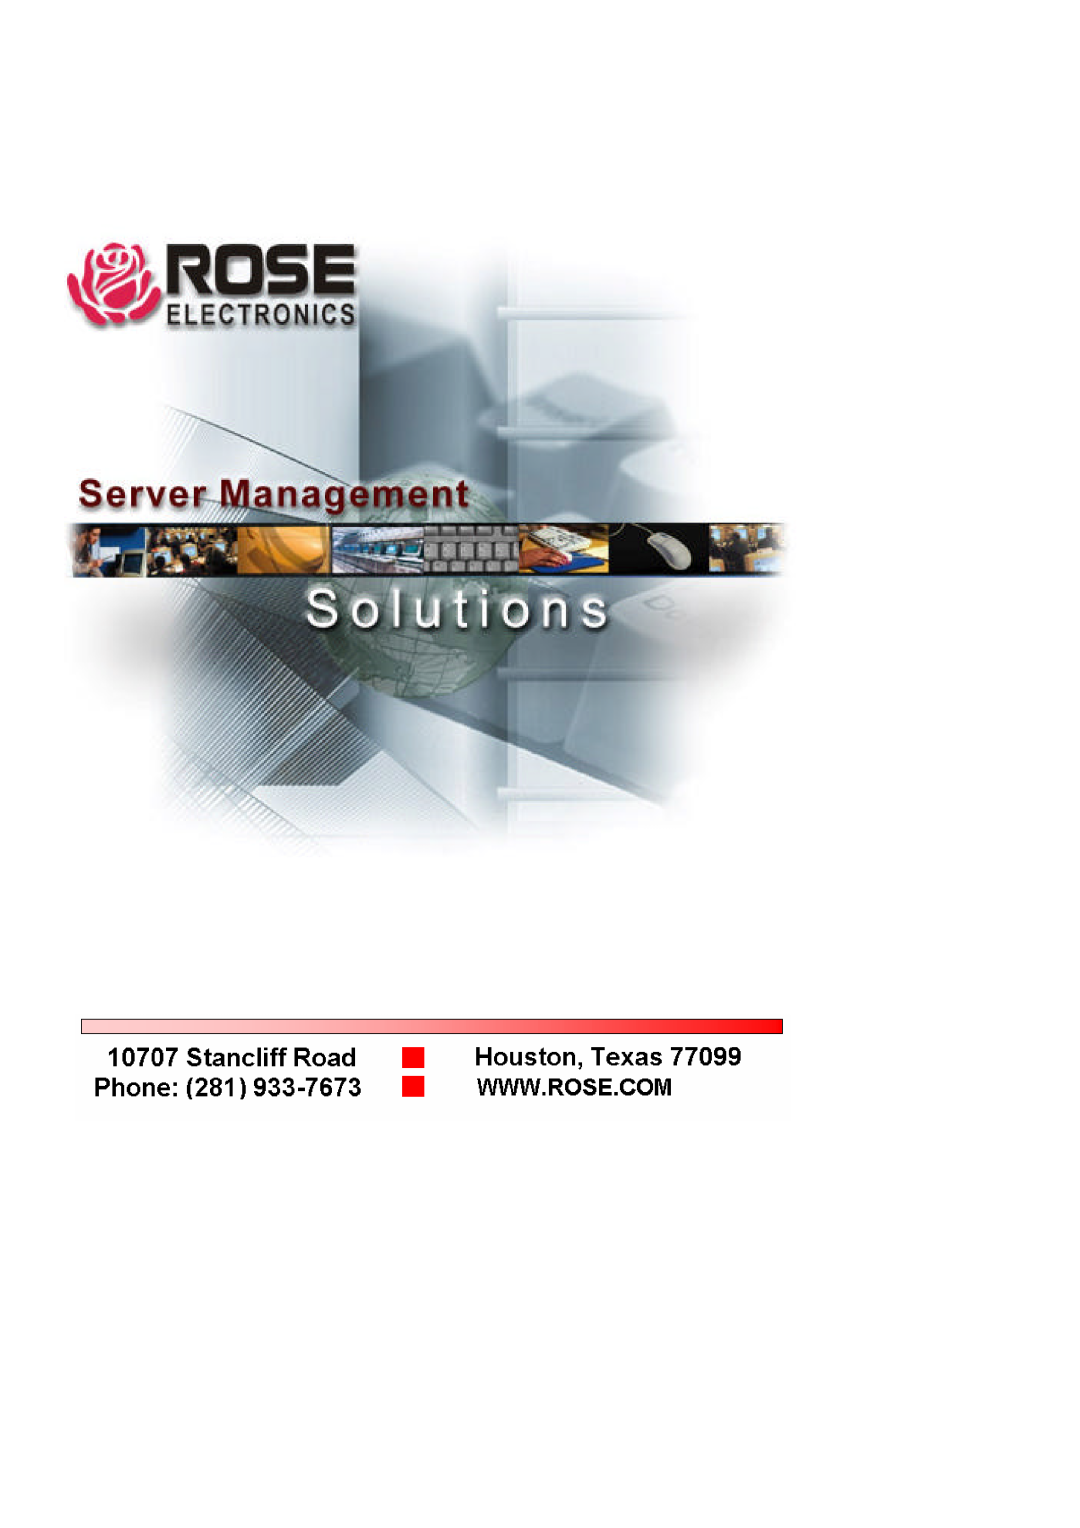 Rose electronic Crystal View operation manual 